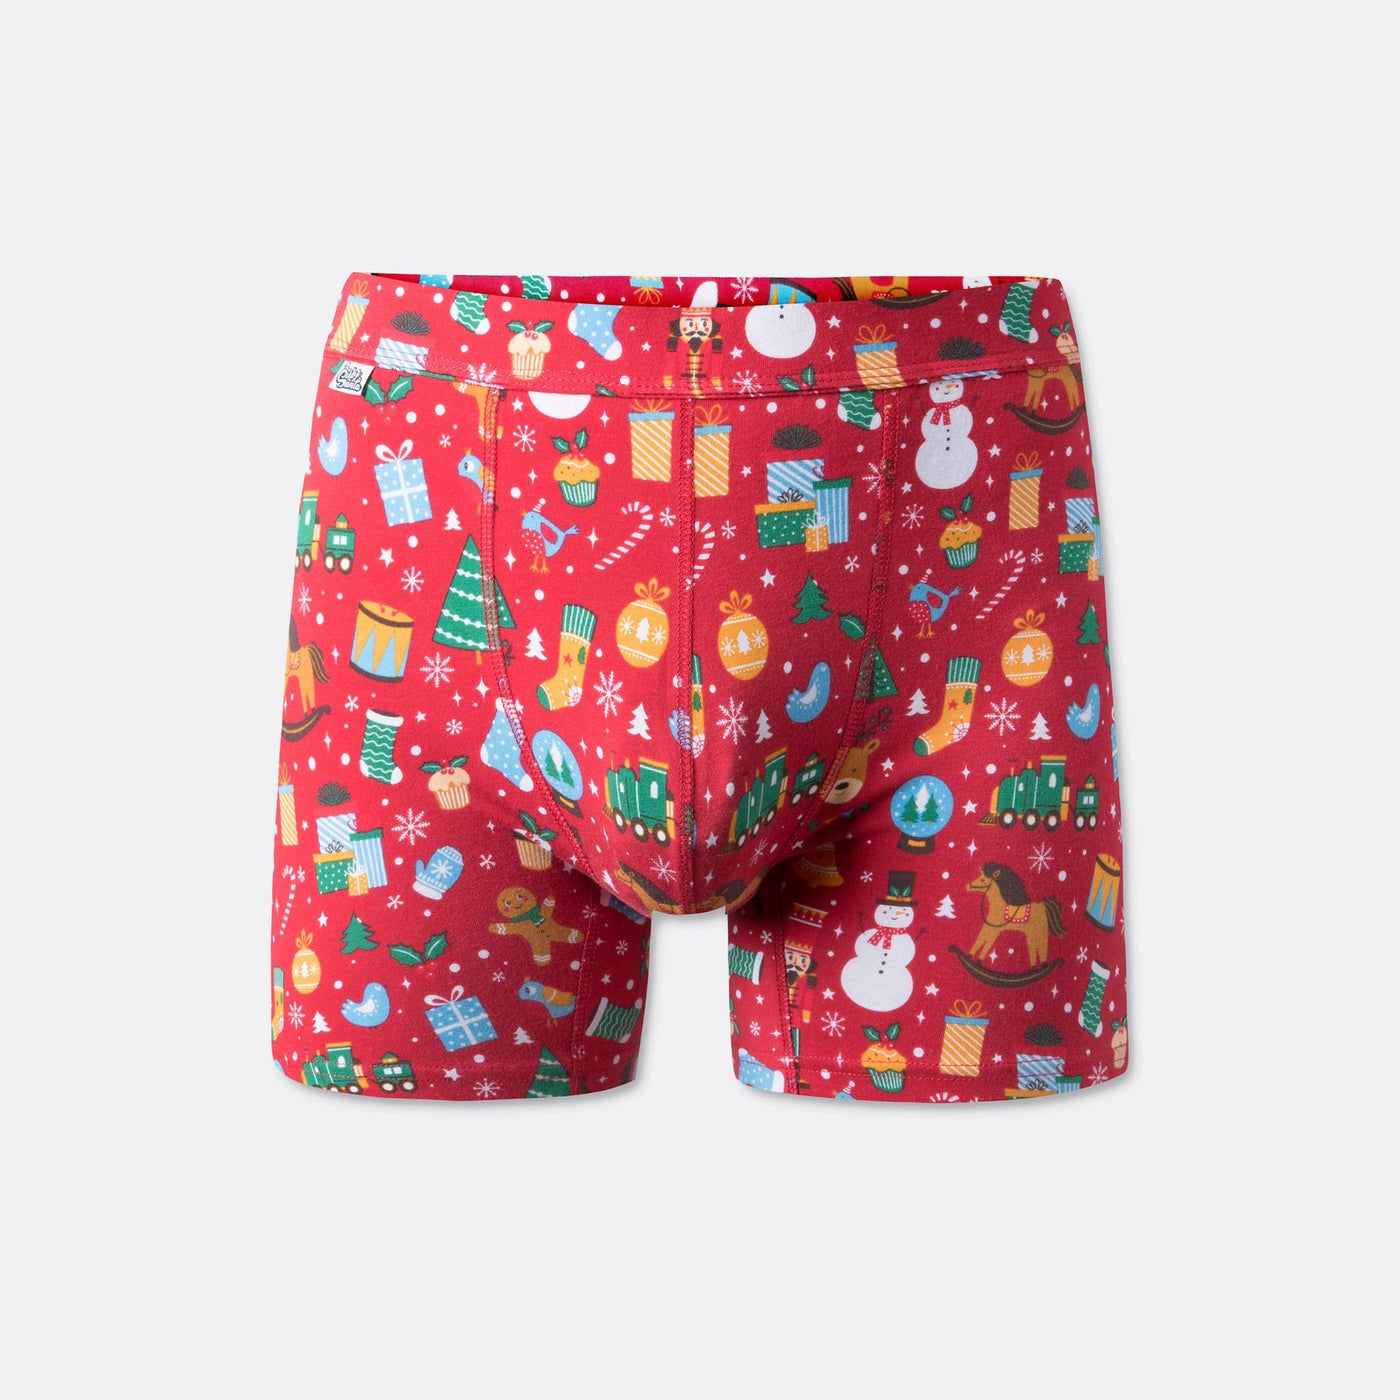 Droom Kerst Rood Boxers